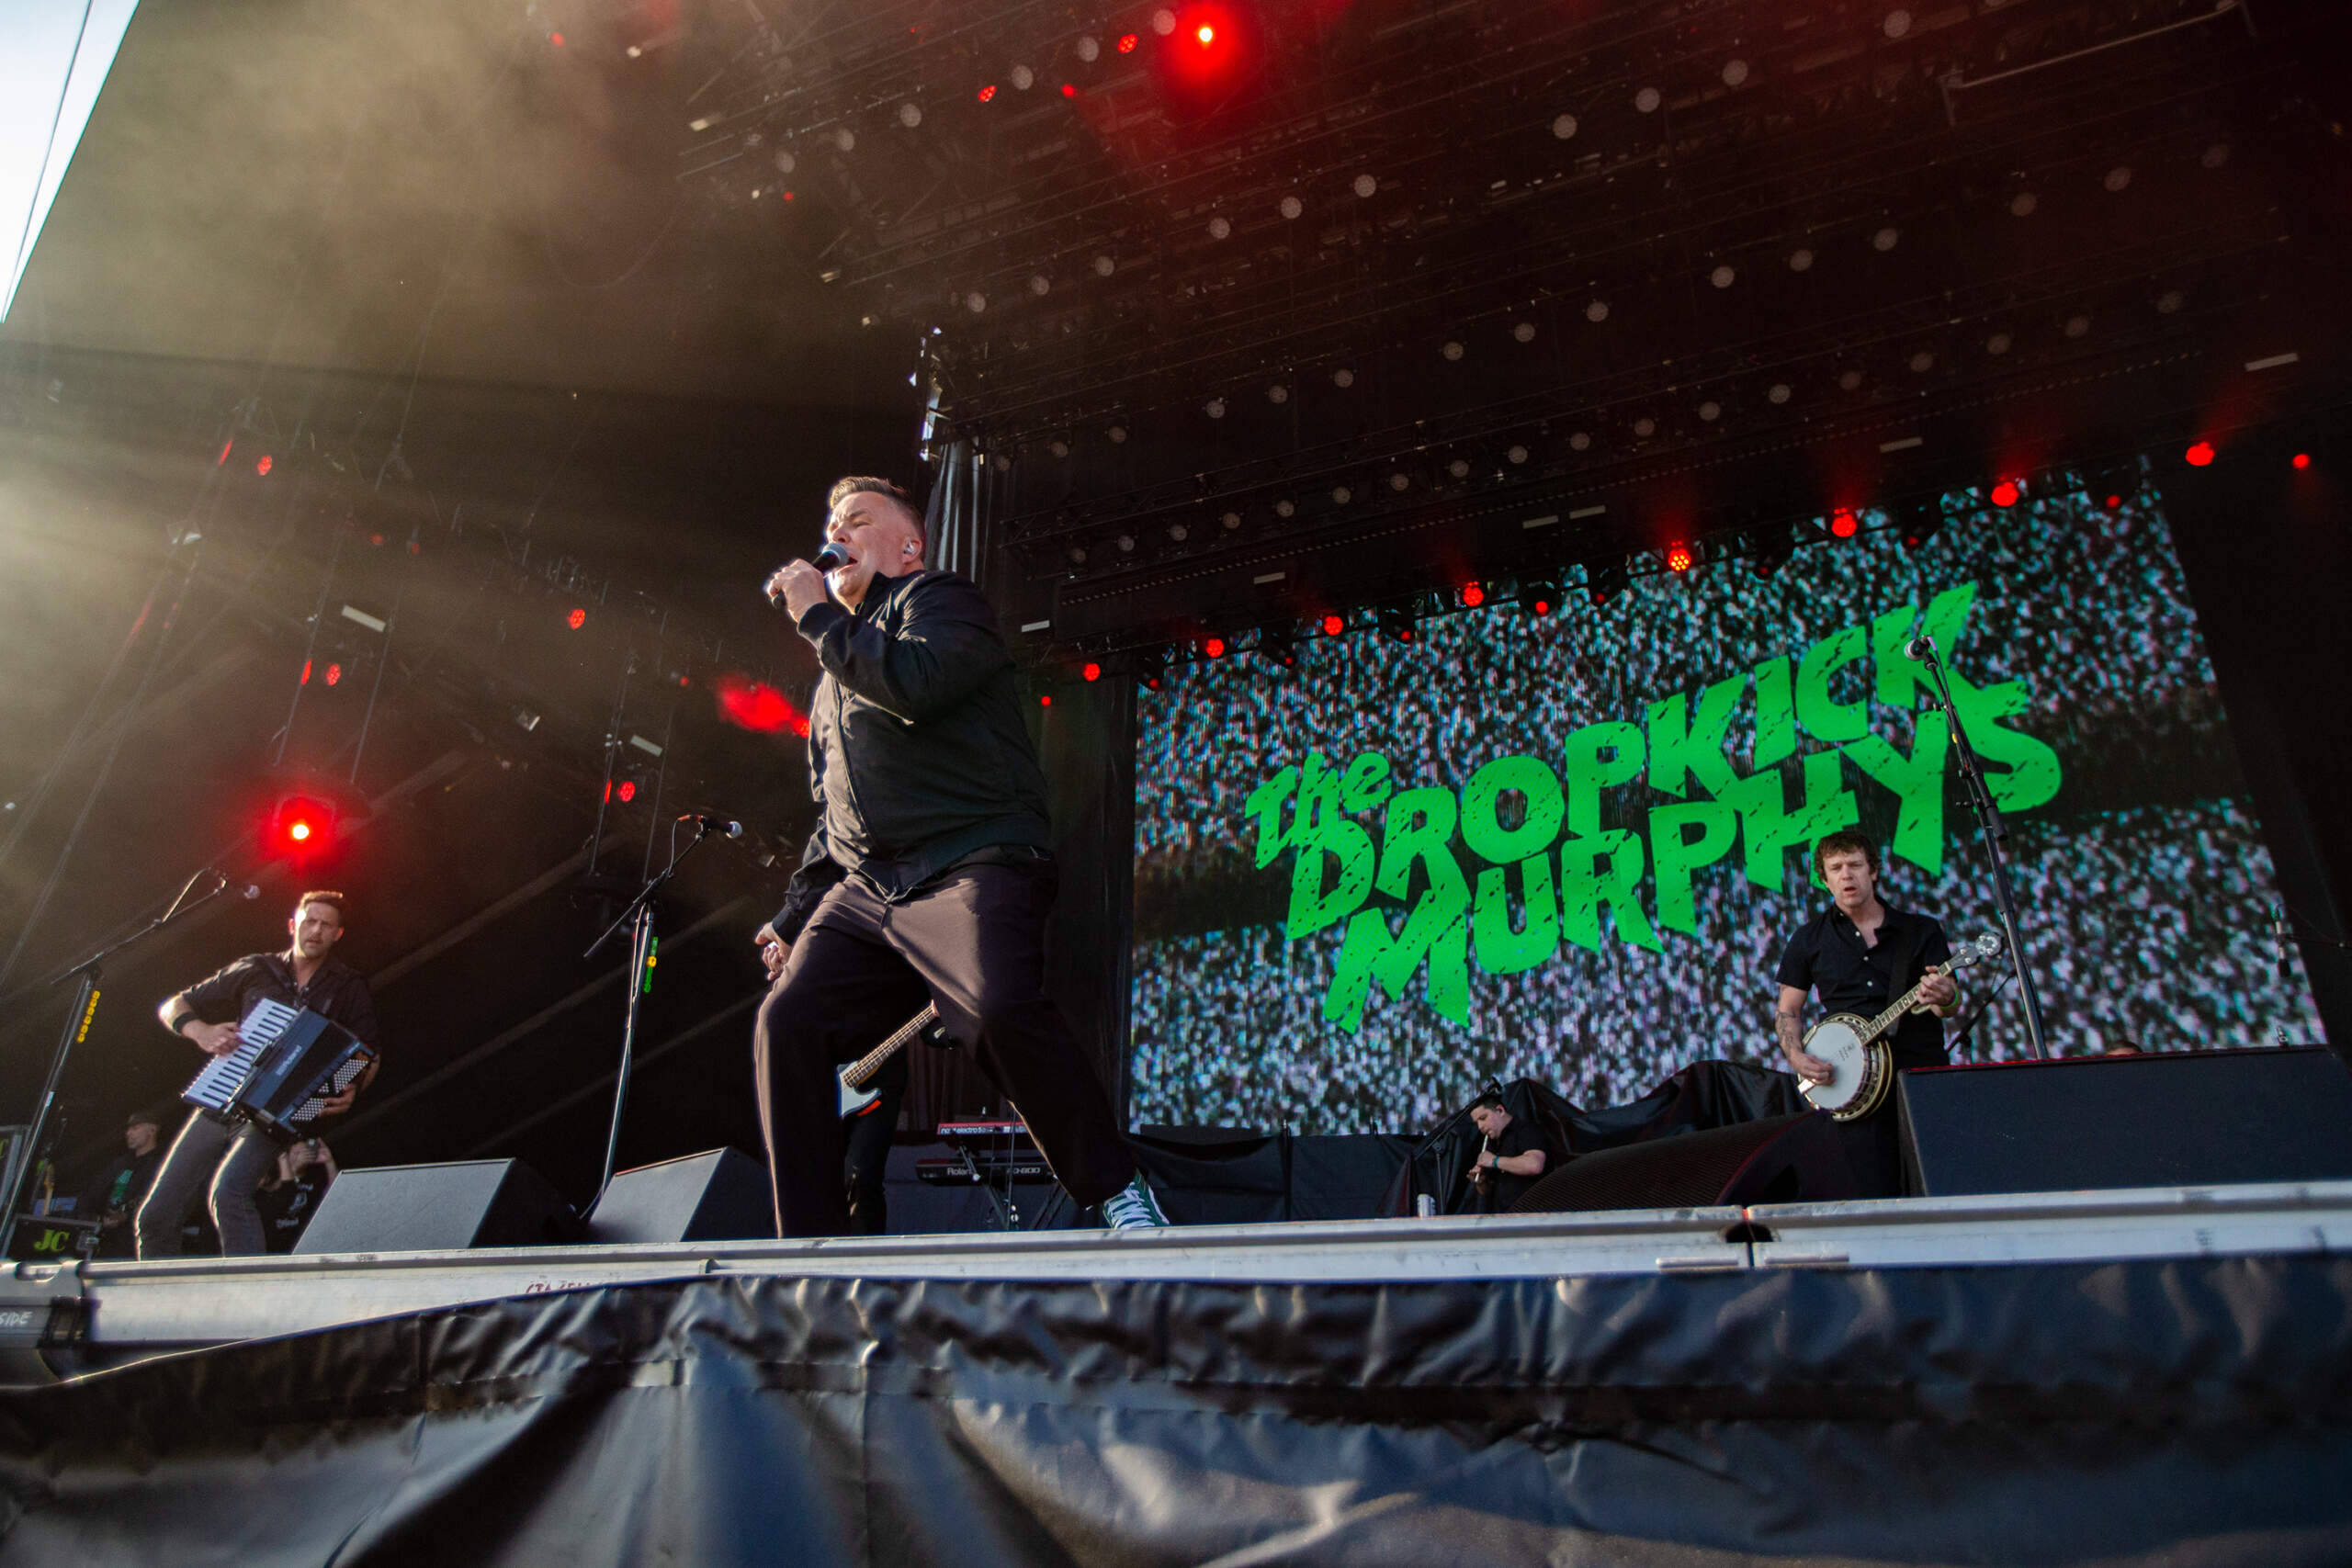 The Dropkick Murphys, who filled in for the Yeah, Yeah, Yeahs, perform at Boston Calling. (Jesse Costa/WBUR)